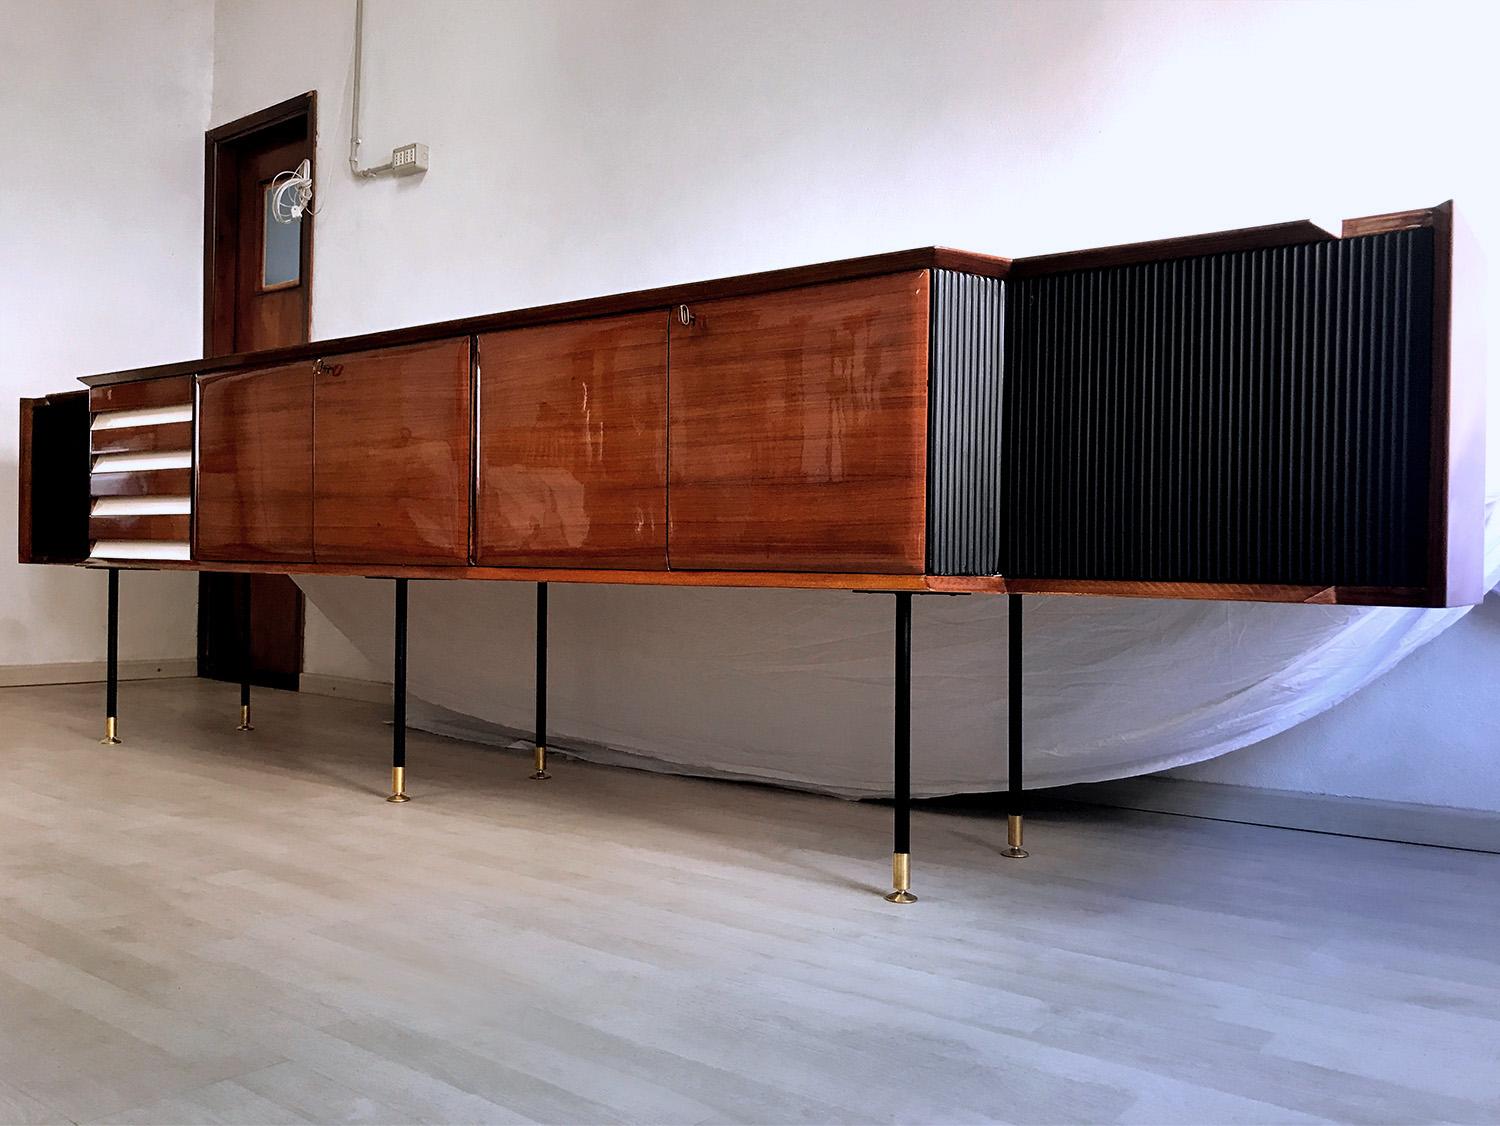 Stunning and very rare rosewood long sideboard designed by Vittorio Dassi in the 1950s.
The structure is a unique piece composed by a long floating cabinet supported by metal legs finished with height-adjustable brass feet.
The doors hide large